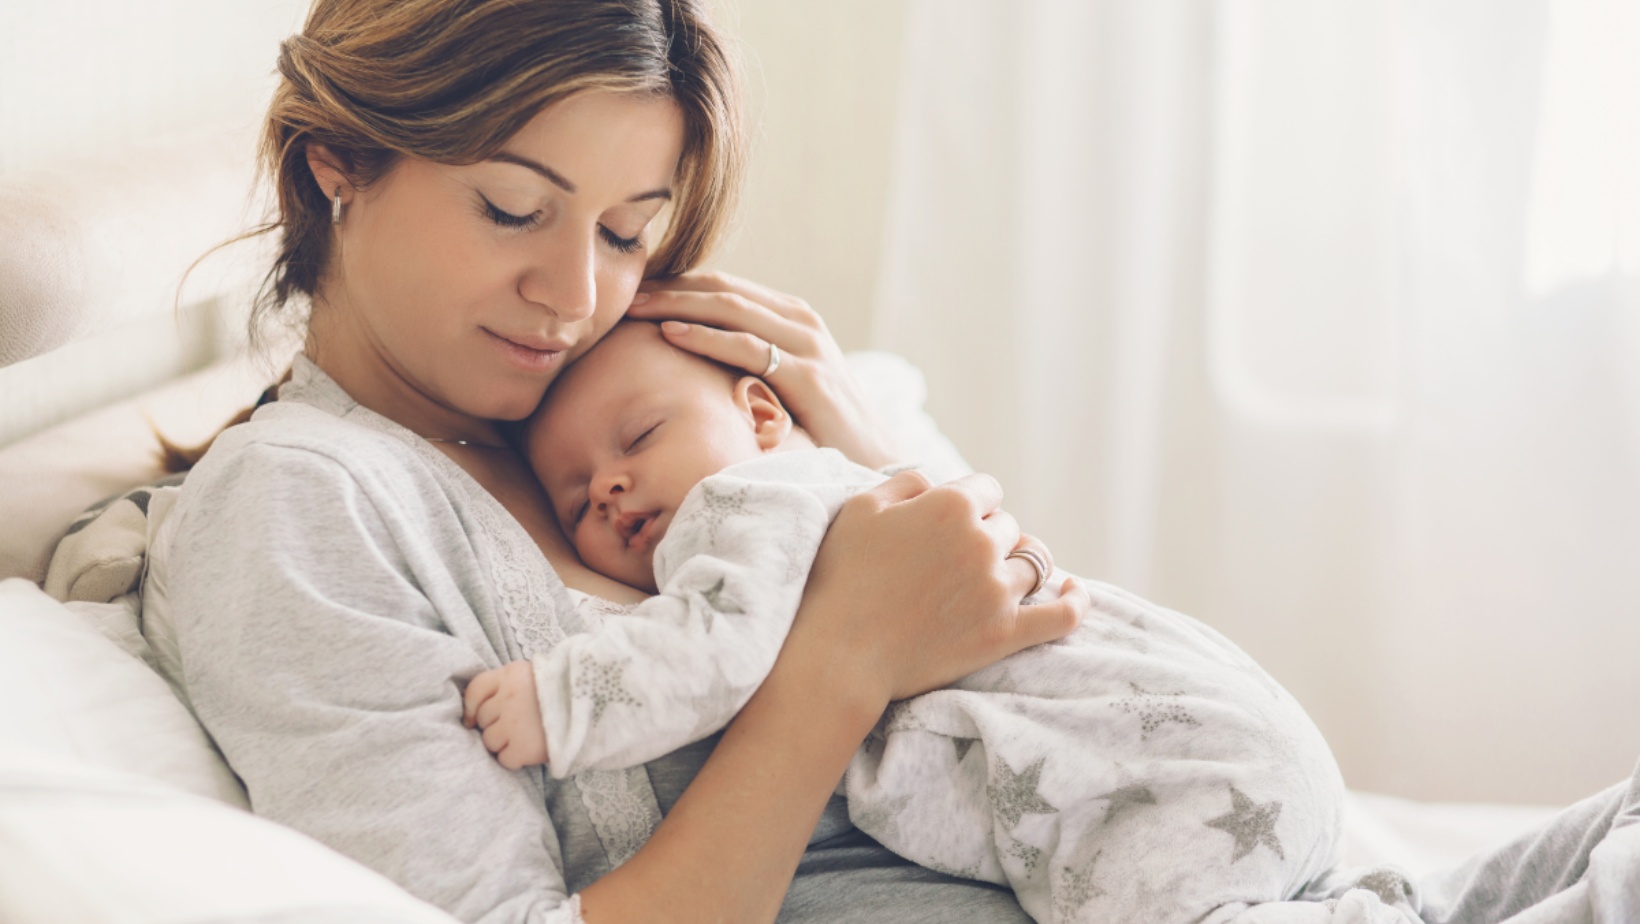 Featured Image for the Do I need postnatal care blog. Mother on couch with a sleeping baby held on her chest. The mother has her eyes closed, and is smiling with adoration.